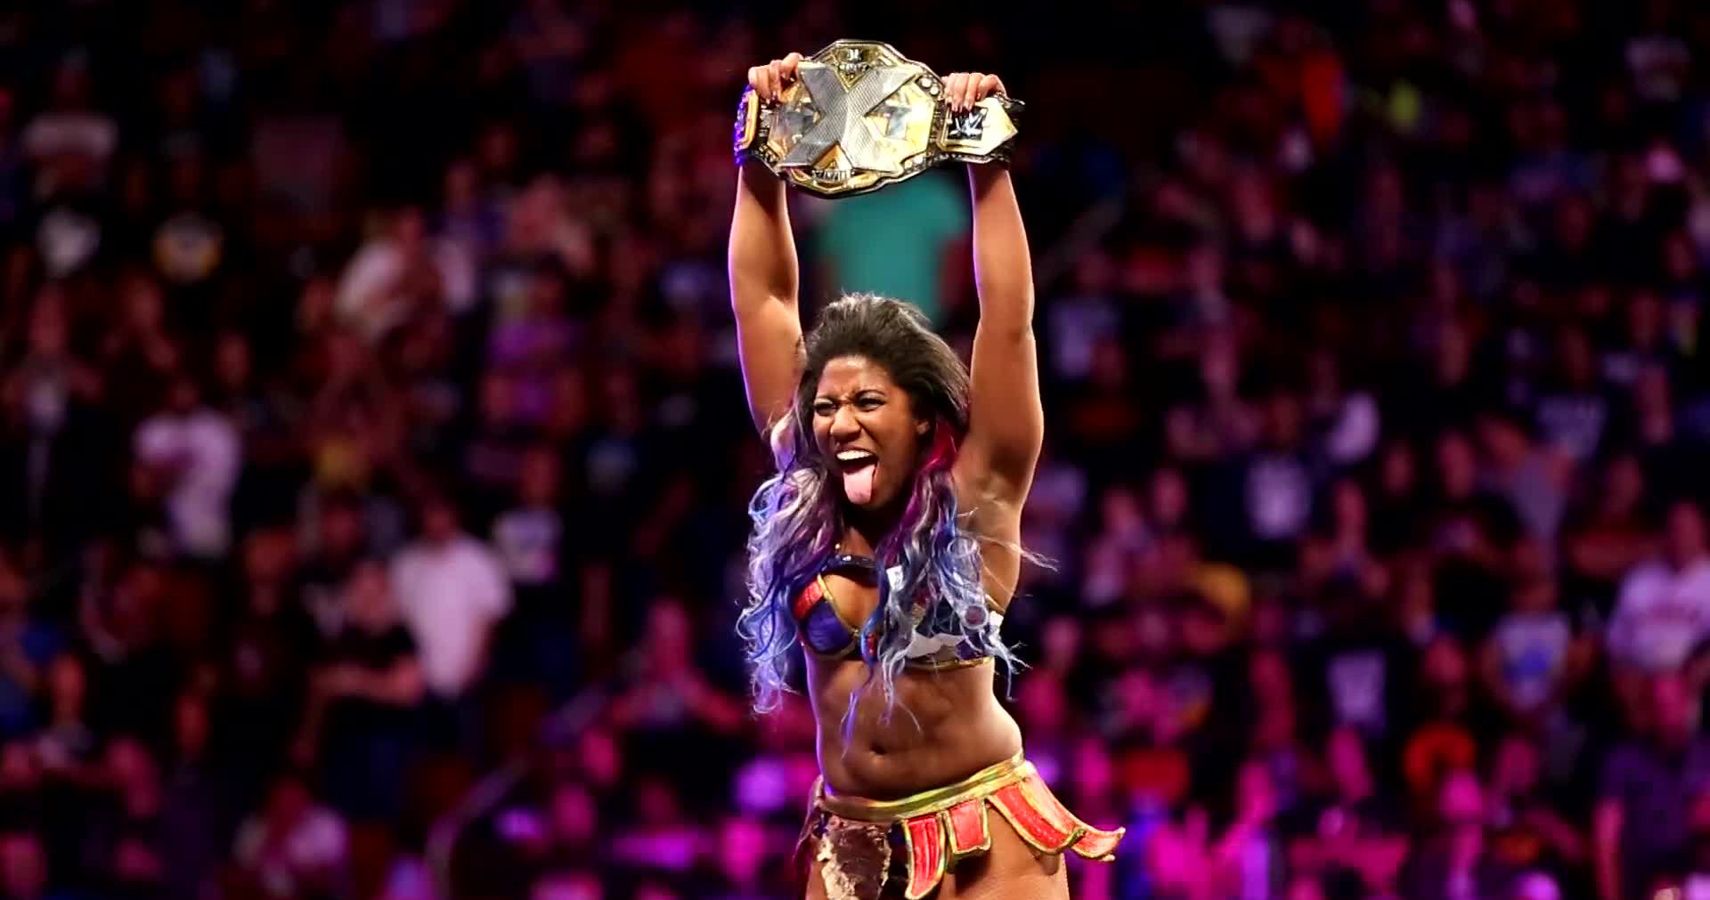 10 WWE Female Superstars Who Could Break Out In 2019